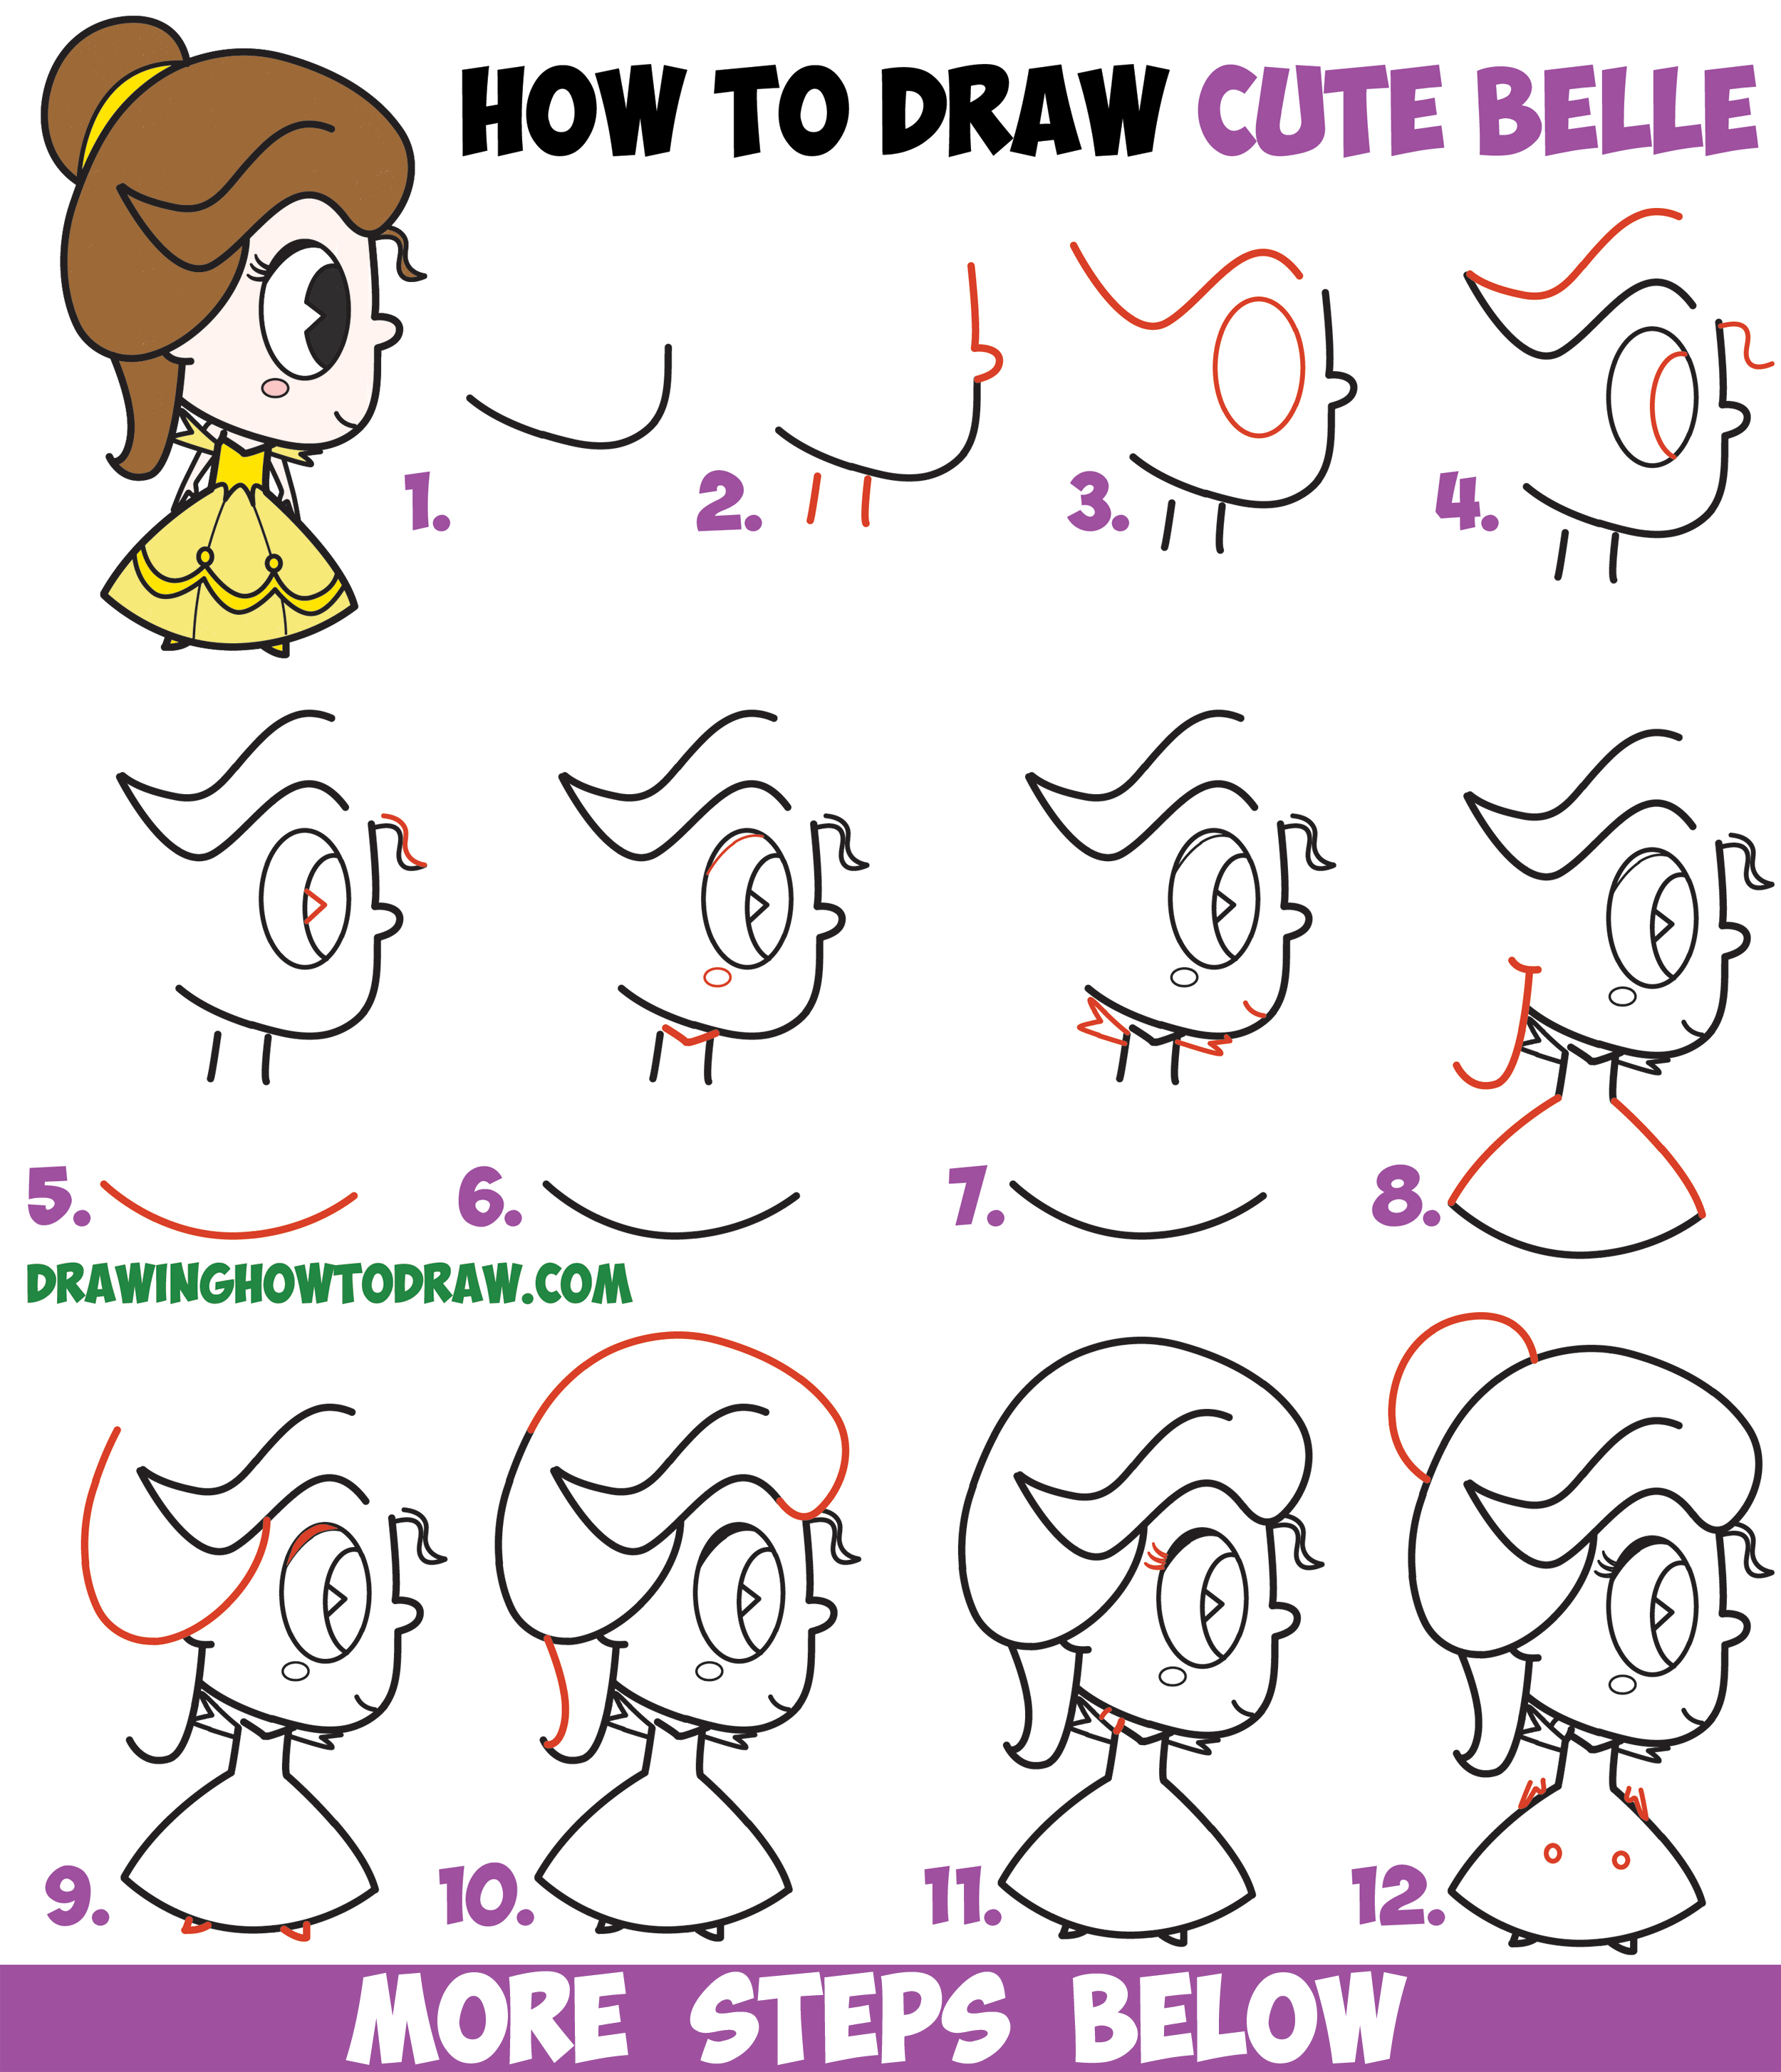 How to Draw Cute Kawaii Chibi Belle from Beauty and the Beast Easy Step by Step Drawing Tutorial for Kids